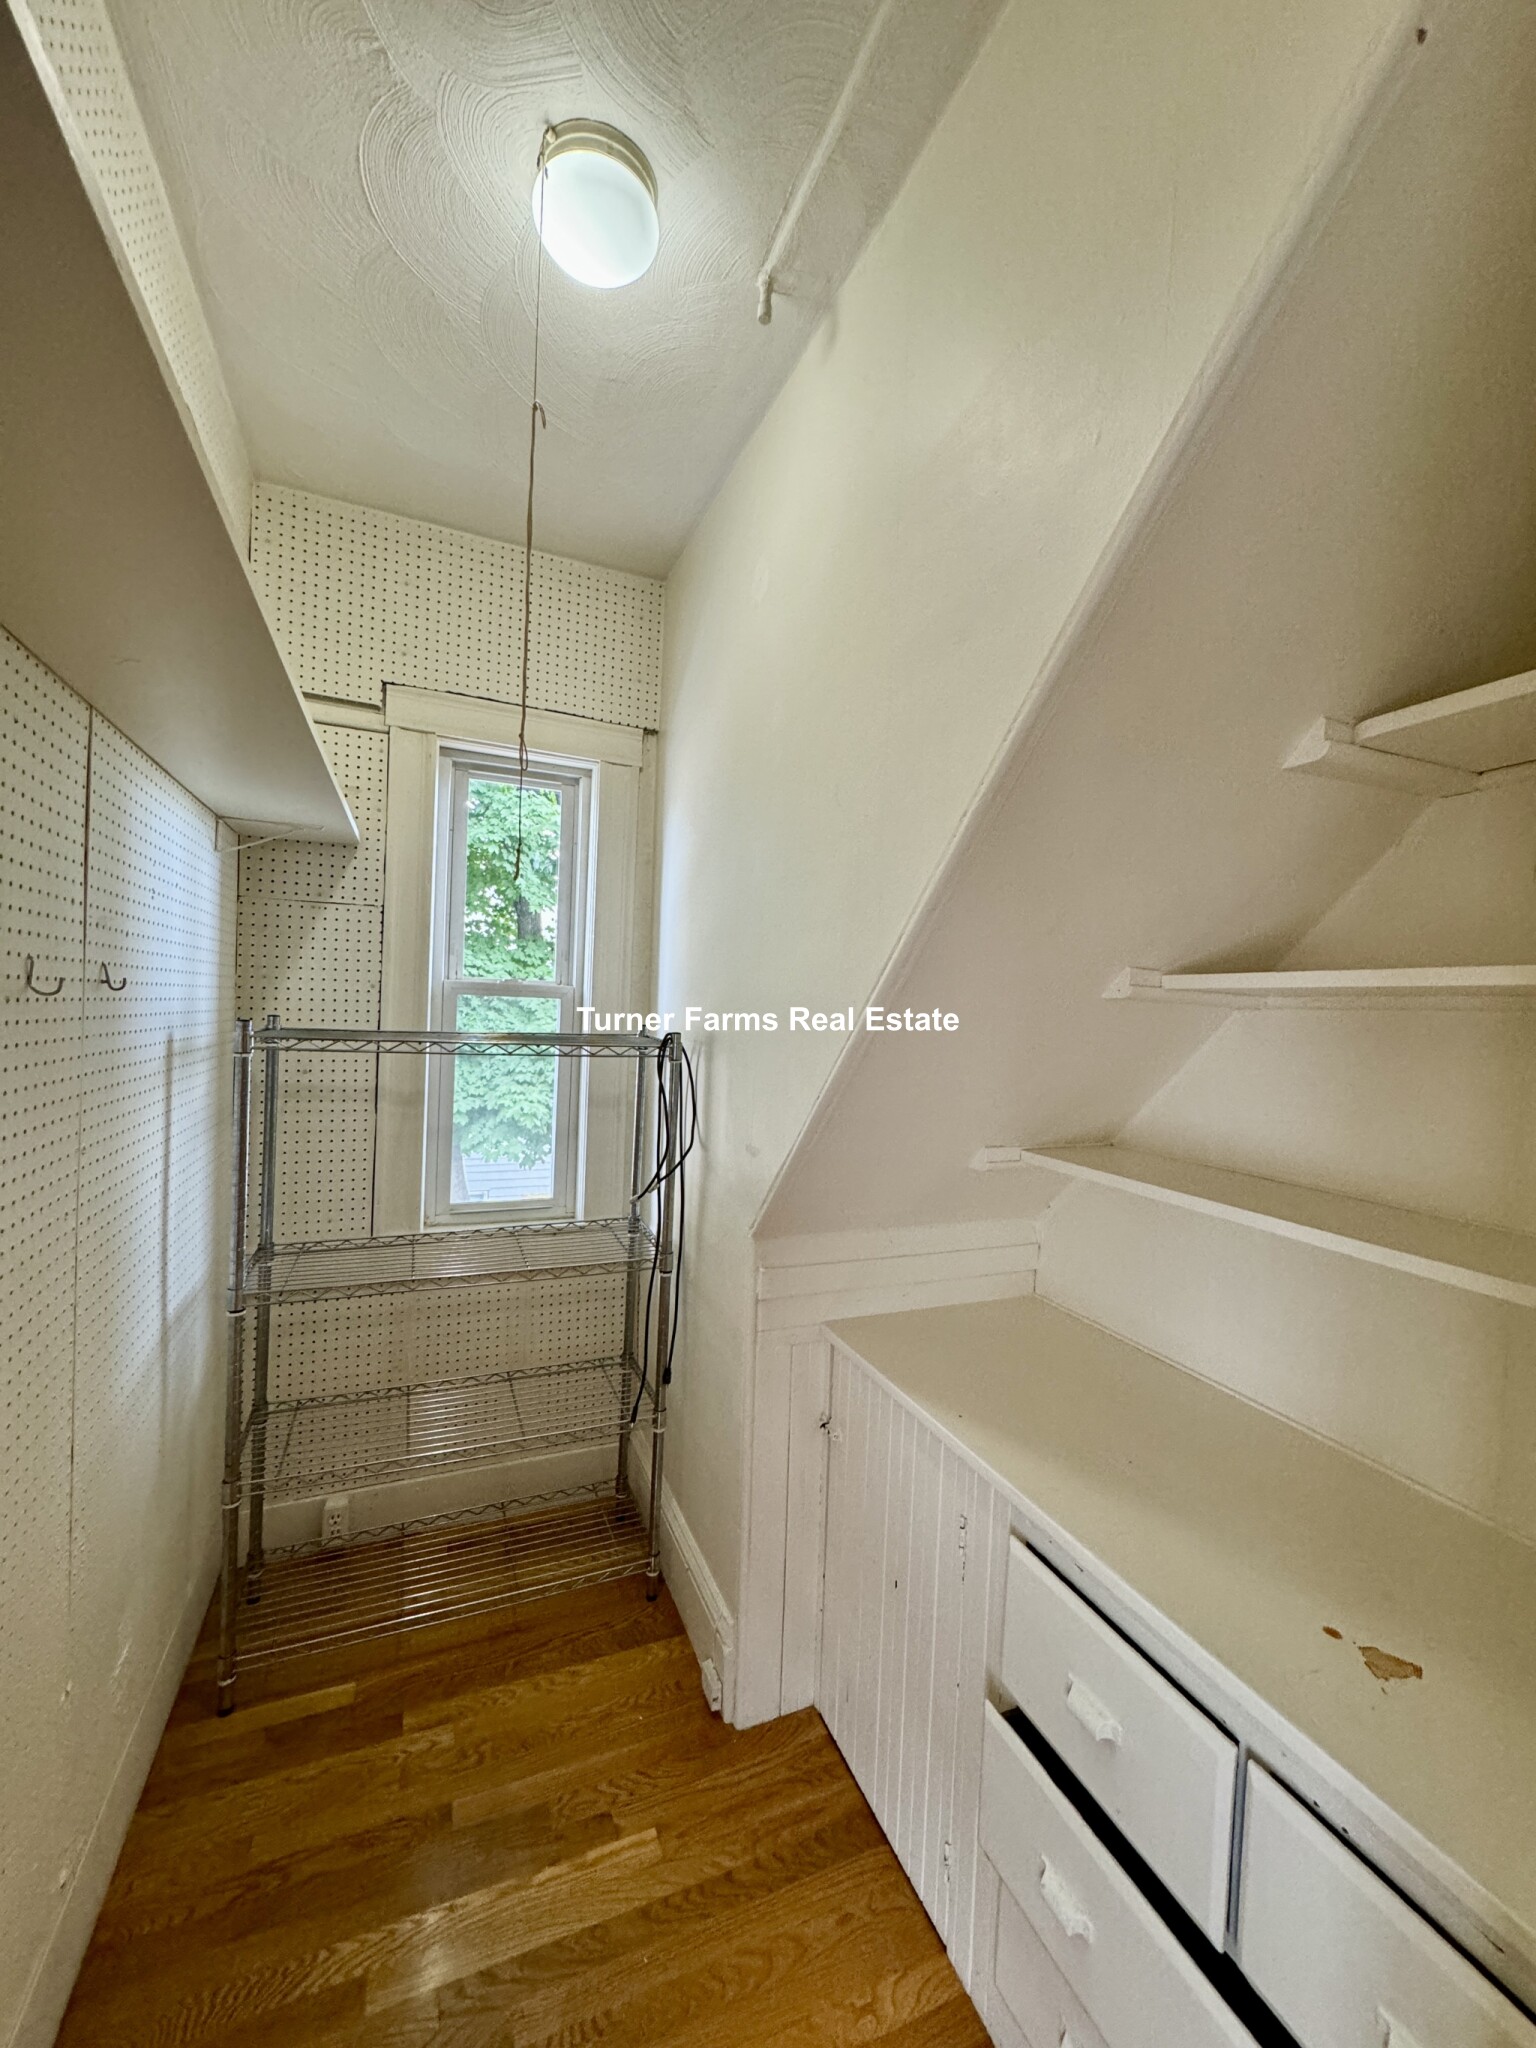 Photos of apartment on Electric Ave.,Somerville MA 02144